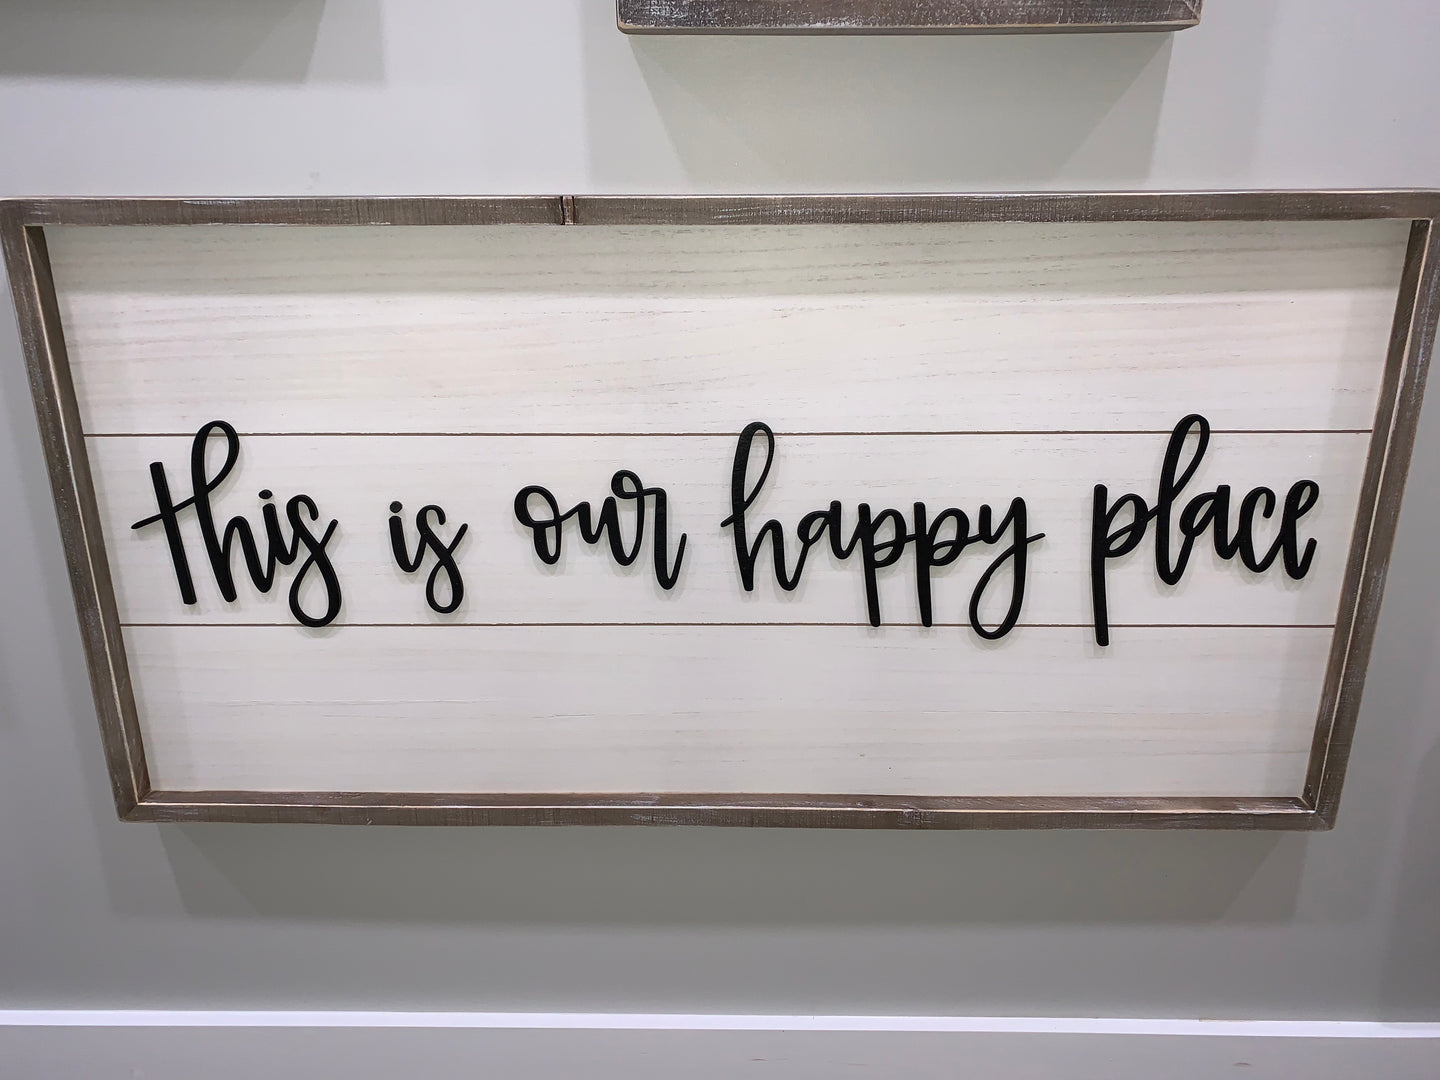 “This is our happy place”